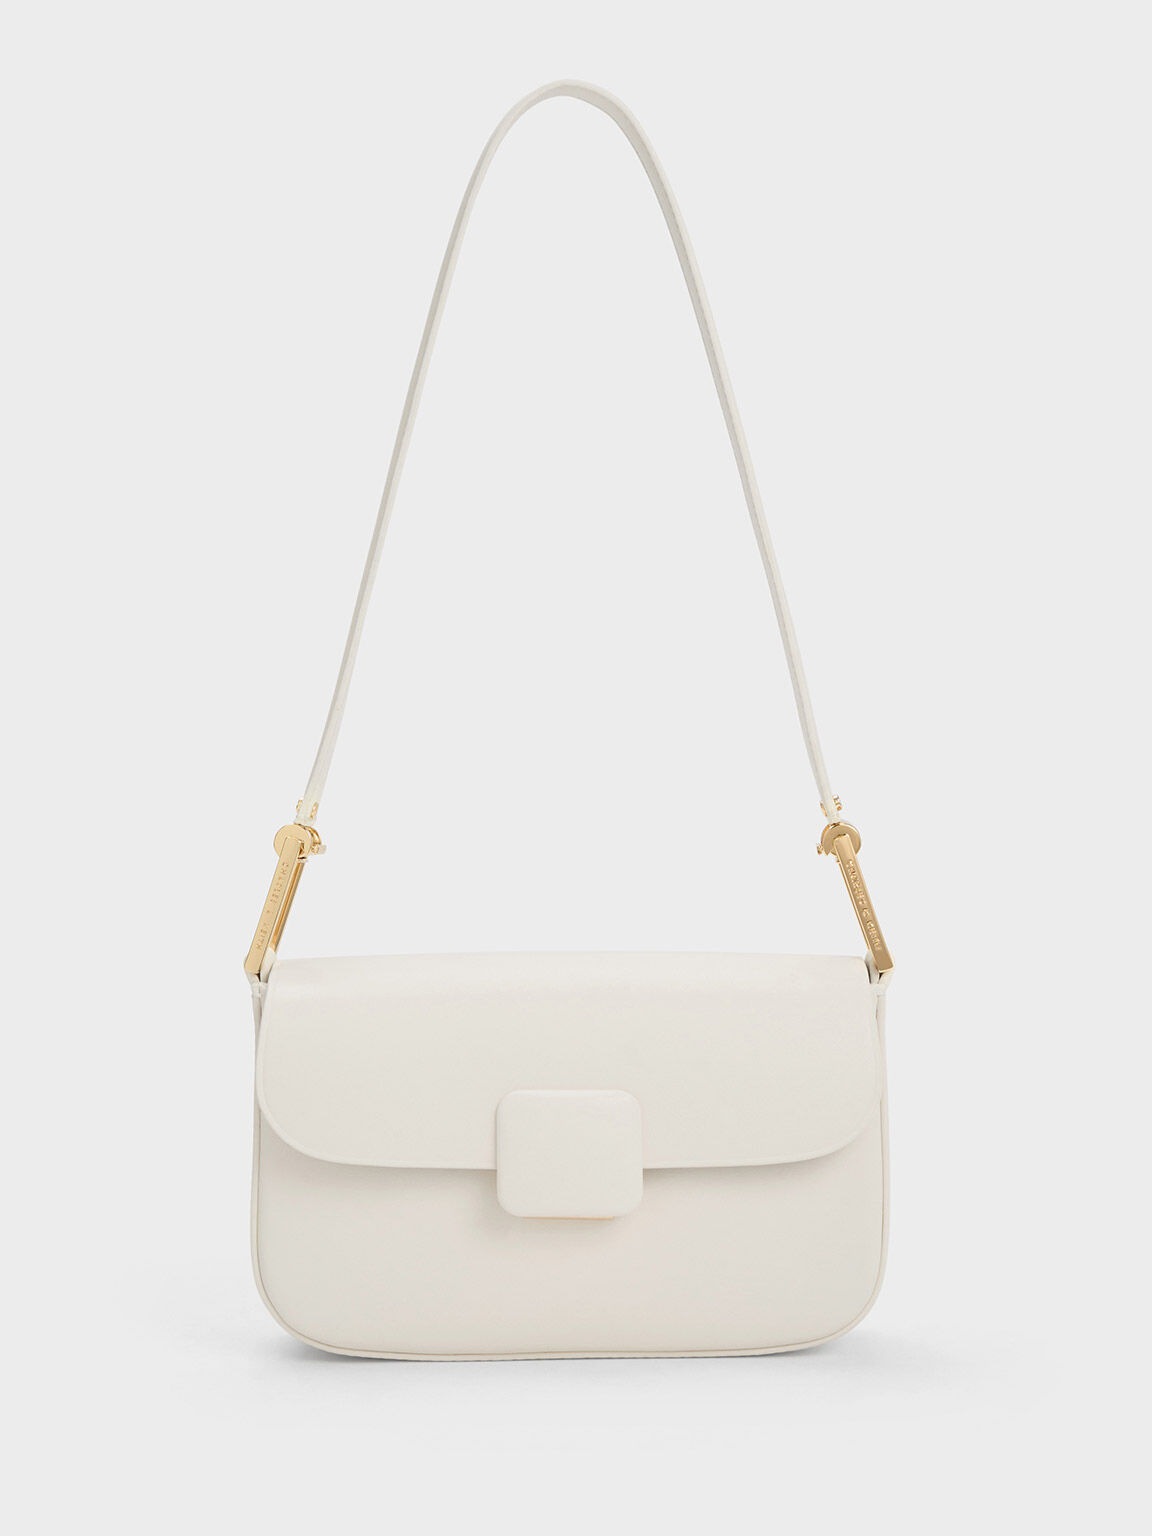 White Classic Double Top Handle Bag CHARLES KEITH US, 46% OFF